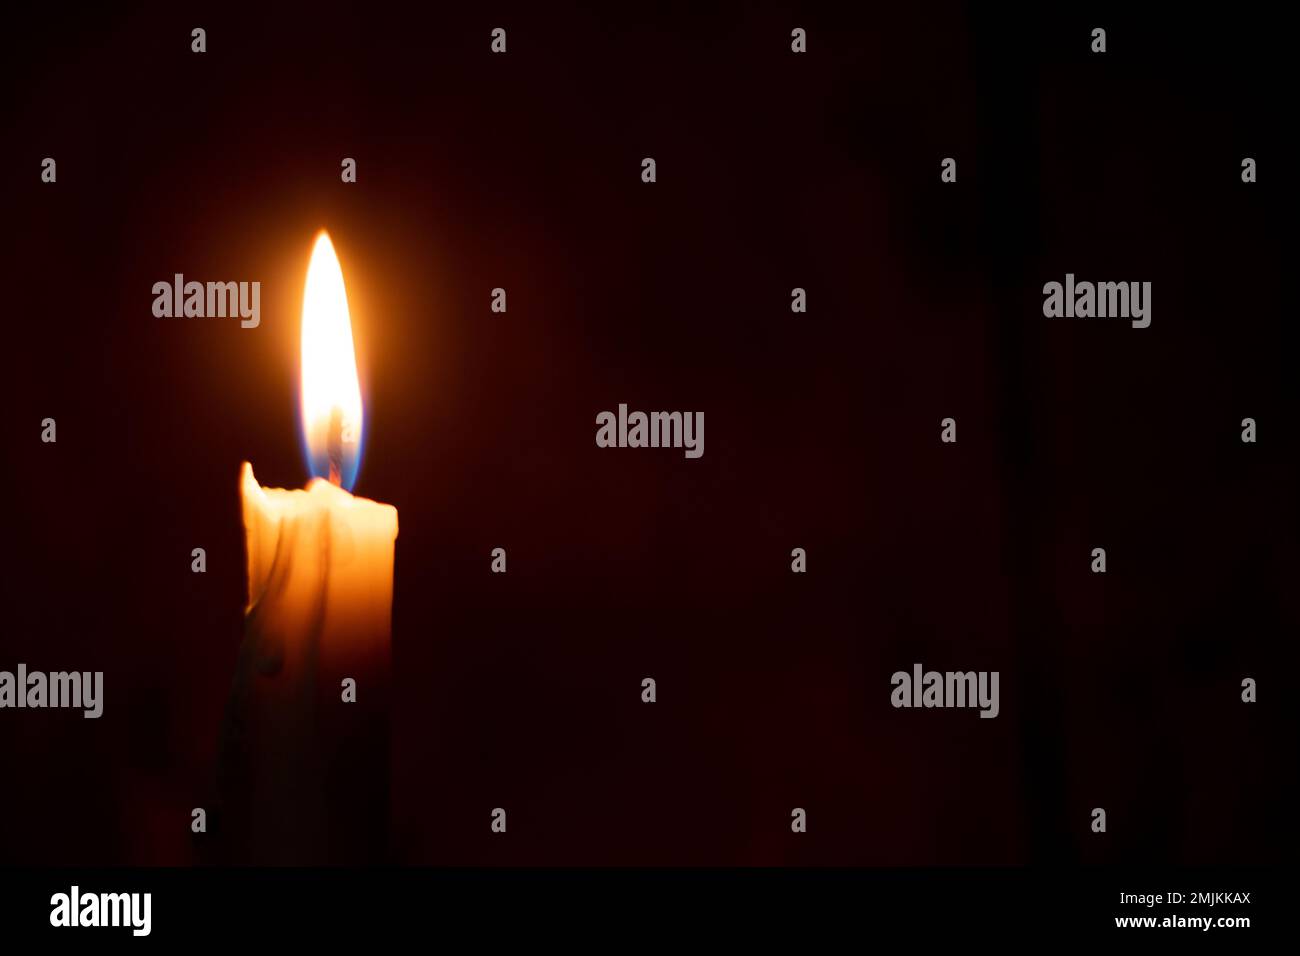 single candle flame in the dark as a background Stock Photo